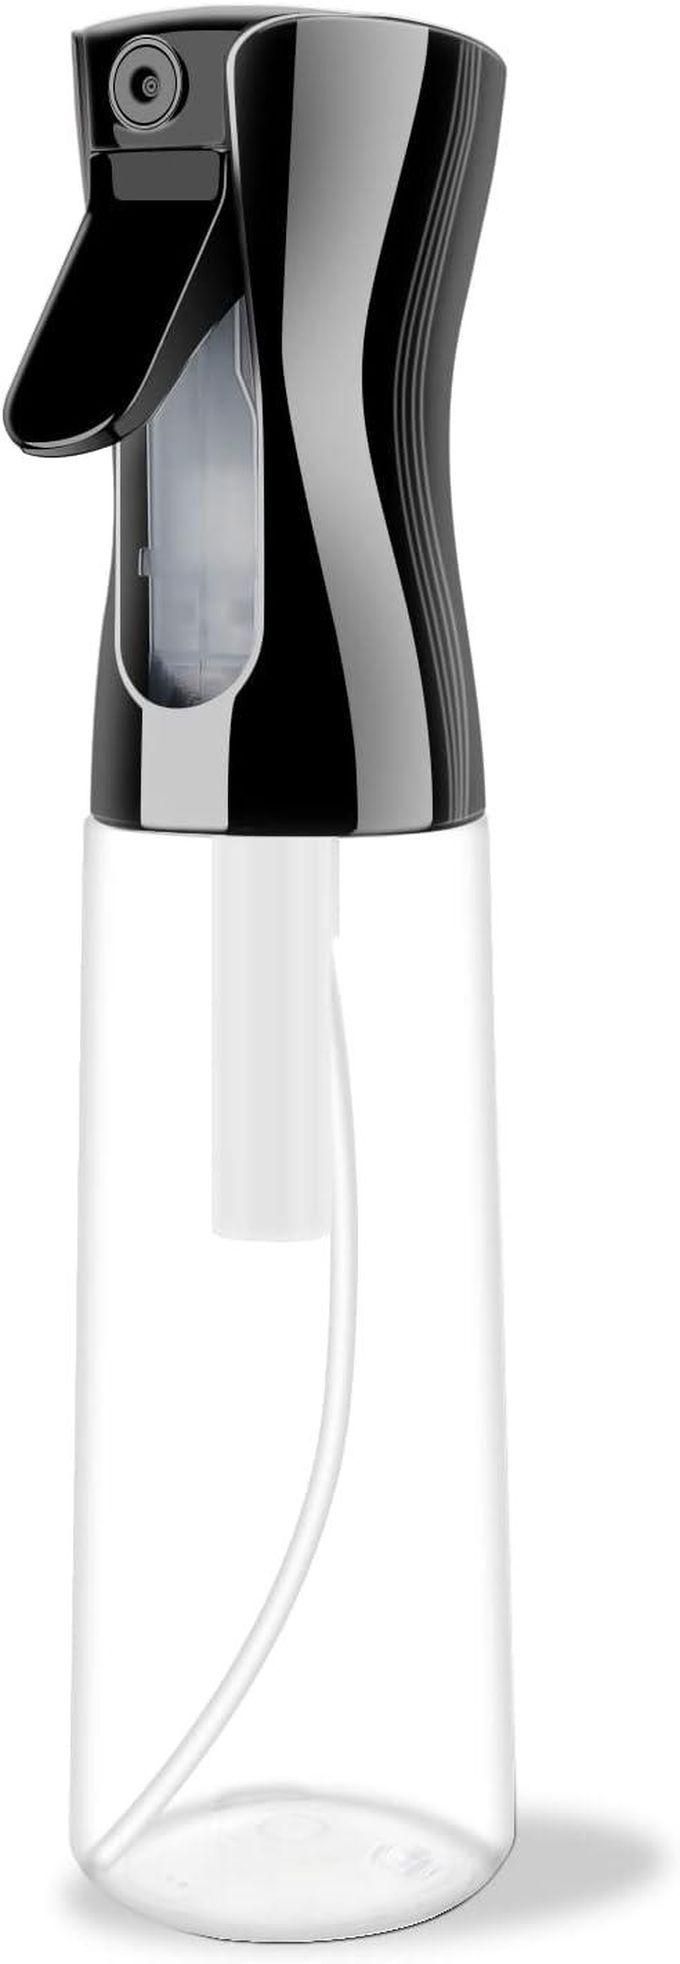 Black and Clear mist bottle 300ml